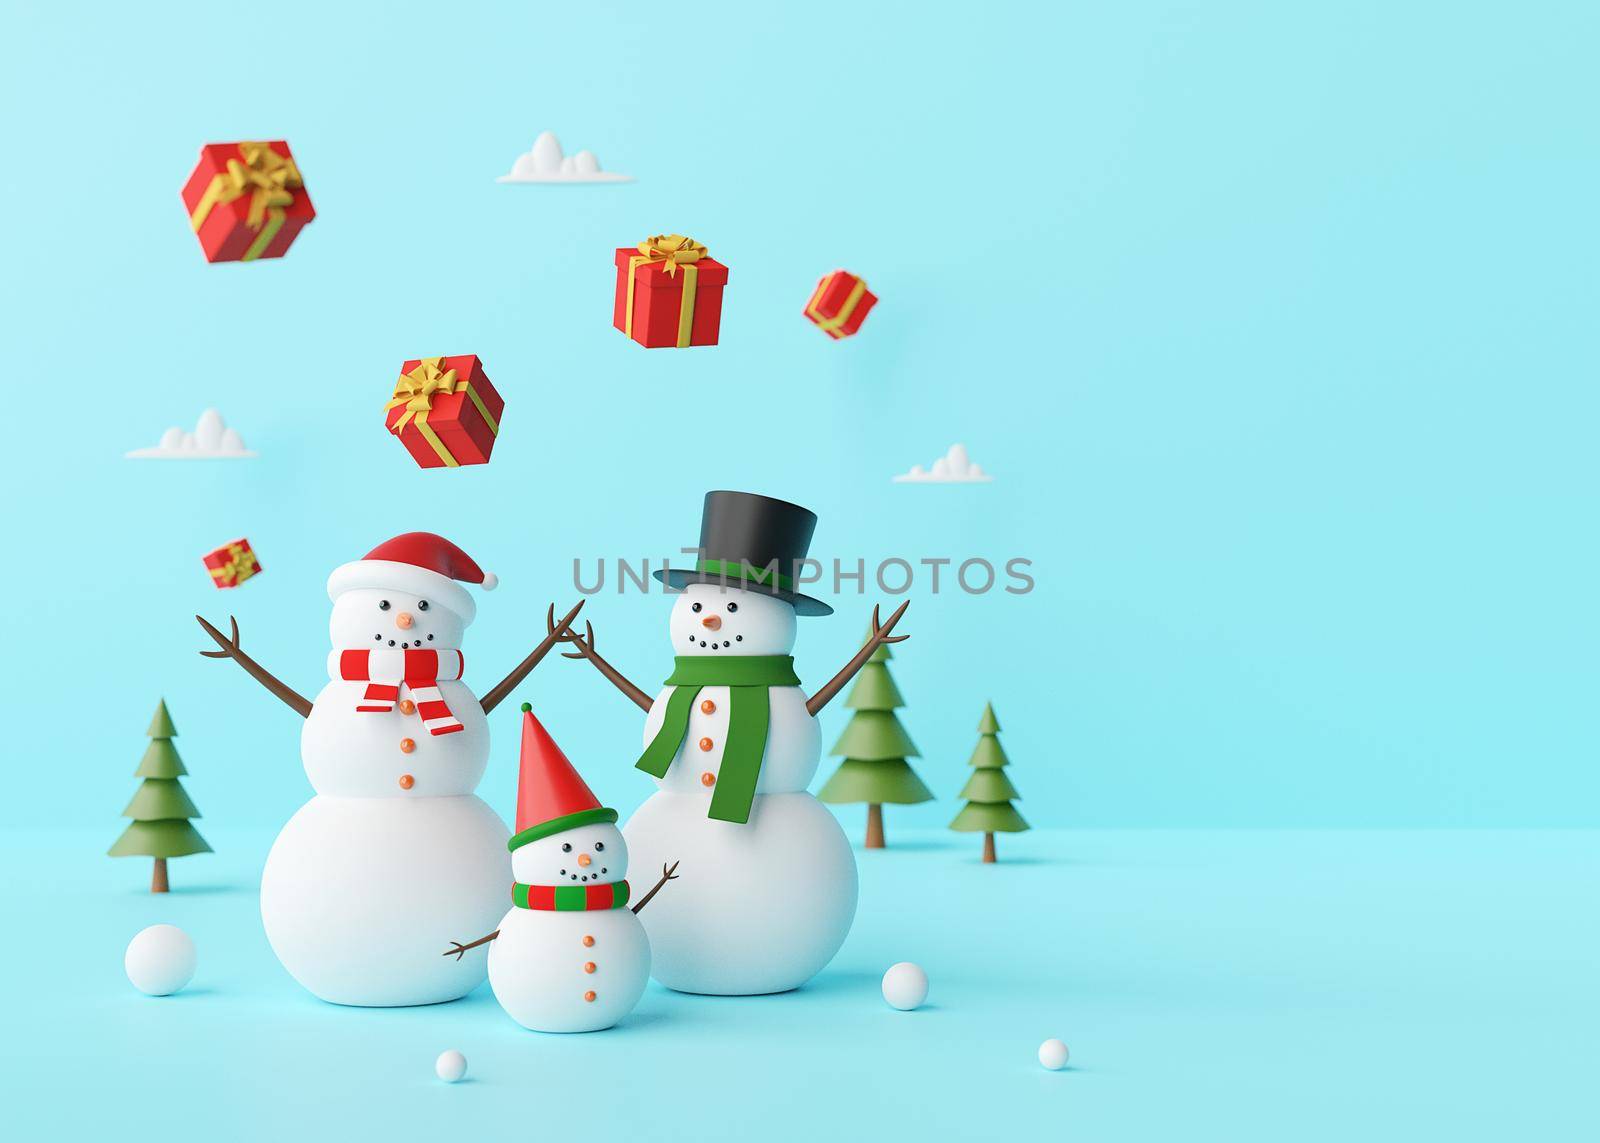 Merry Christmas, Snowman enjoying with christmas gifts on a blue background, 3d rendering by nutzchotwarut